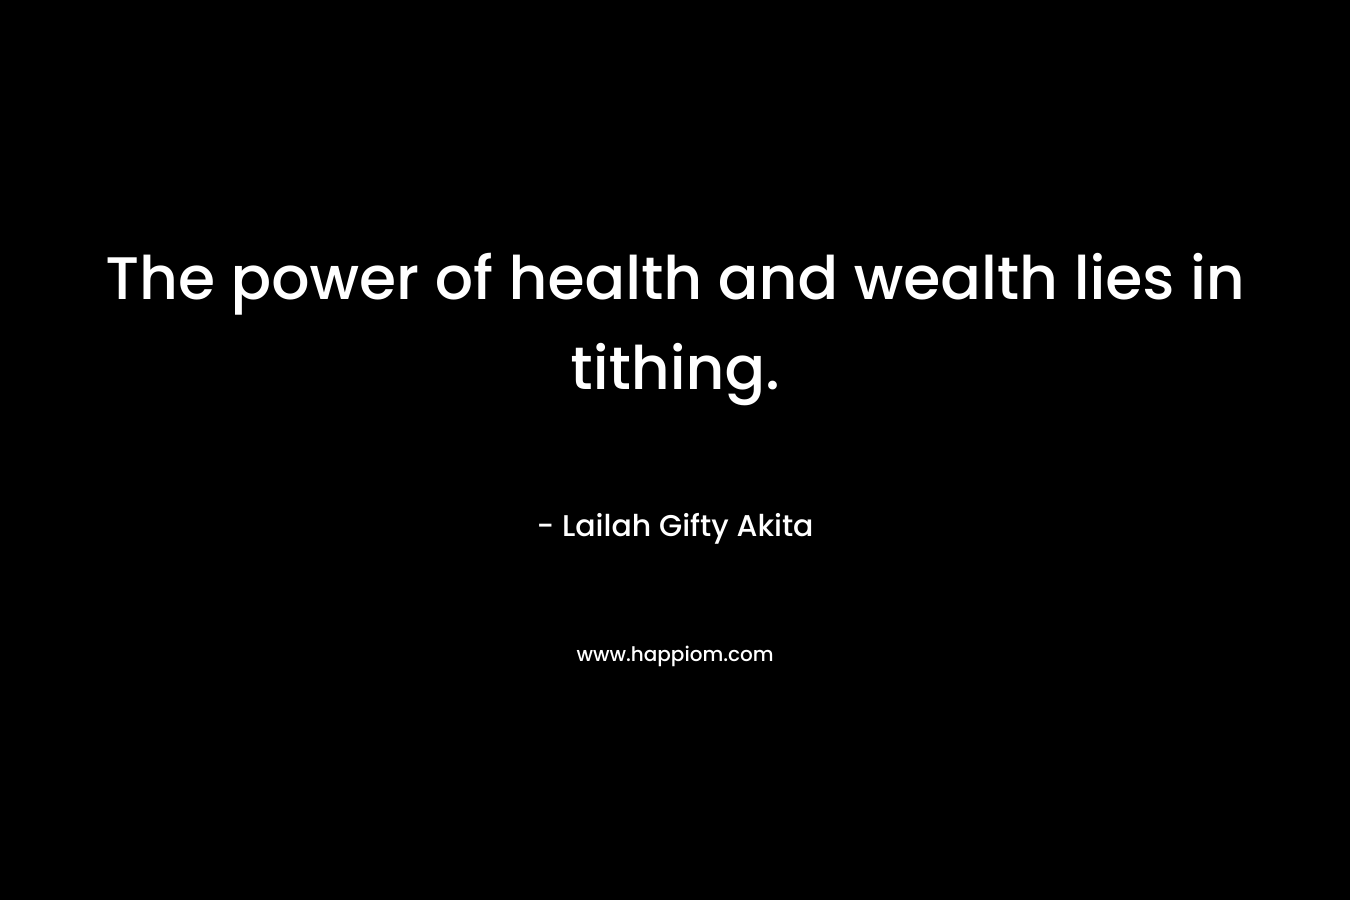 The power of health and wealth lies in tithing.